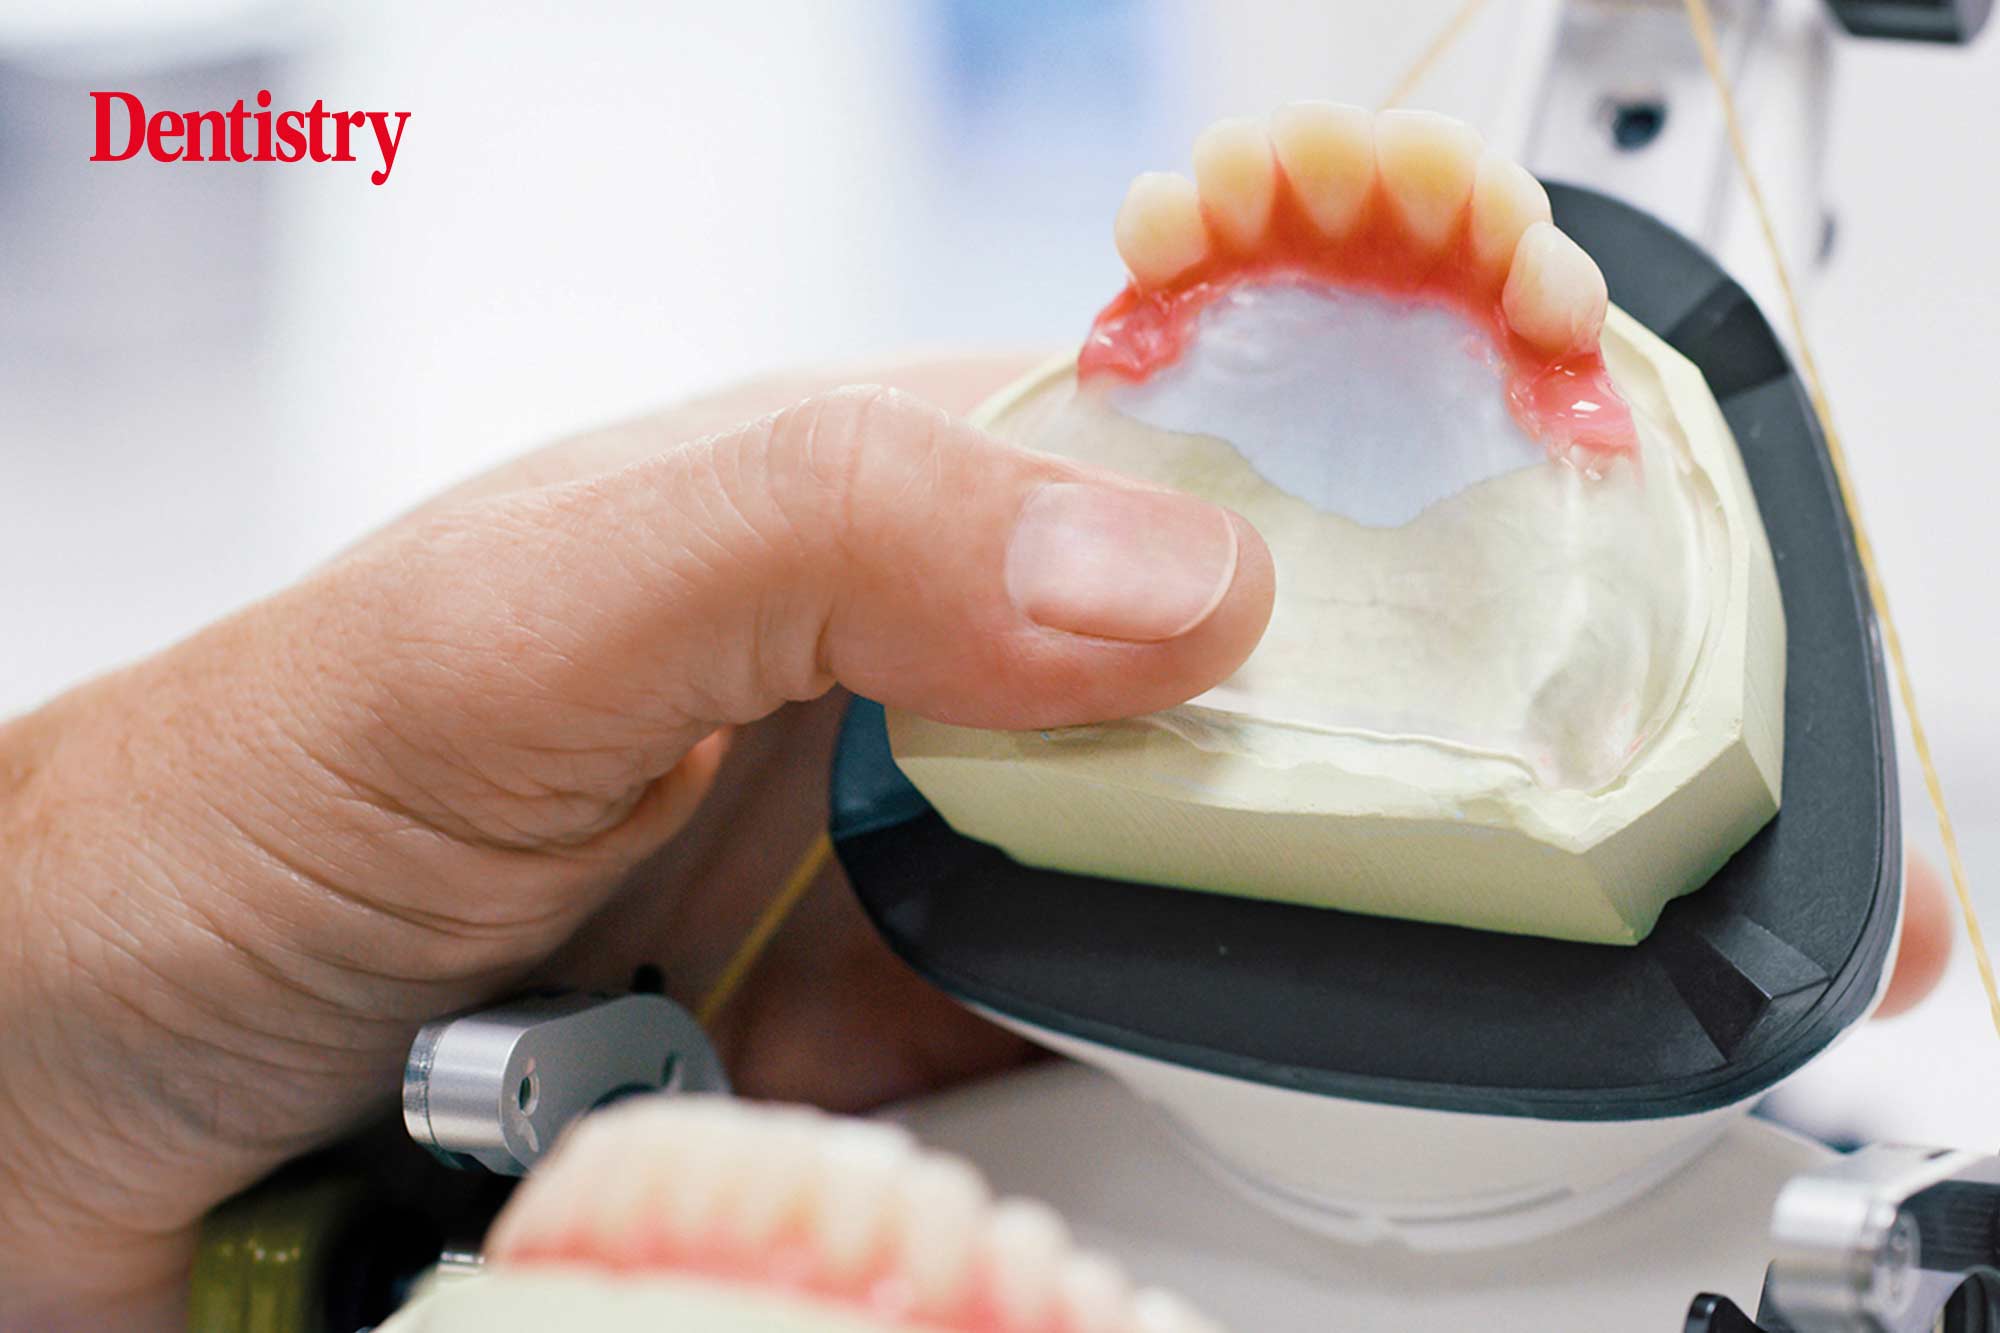 Celebrate the evolution of dentures with Ivoclar